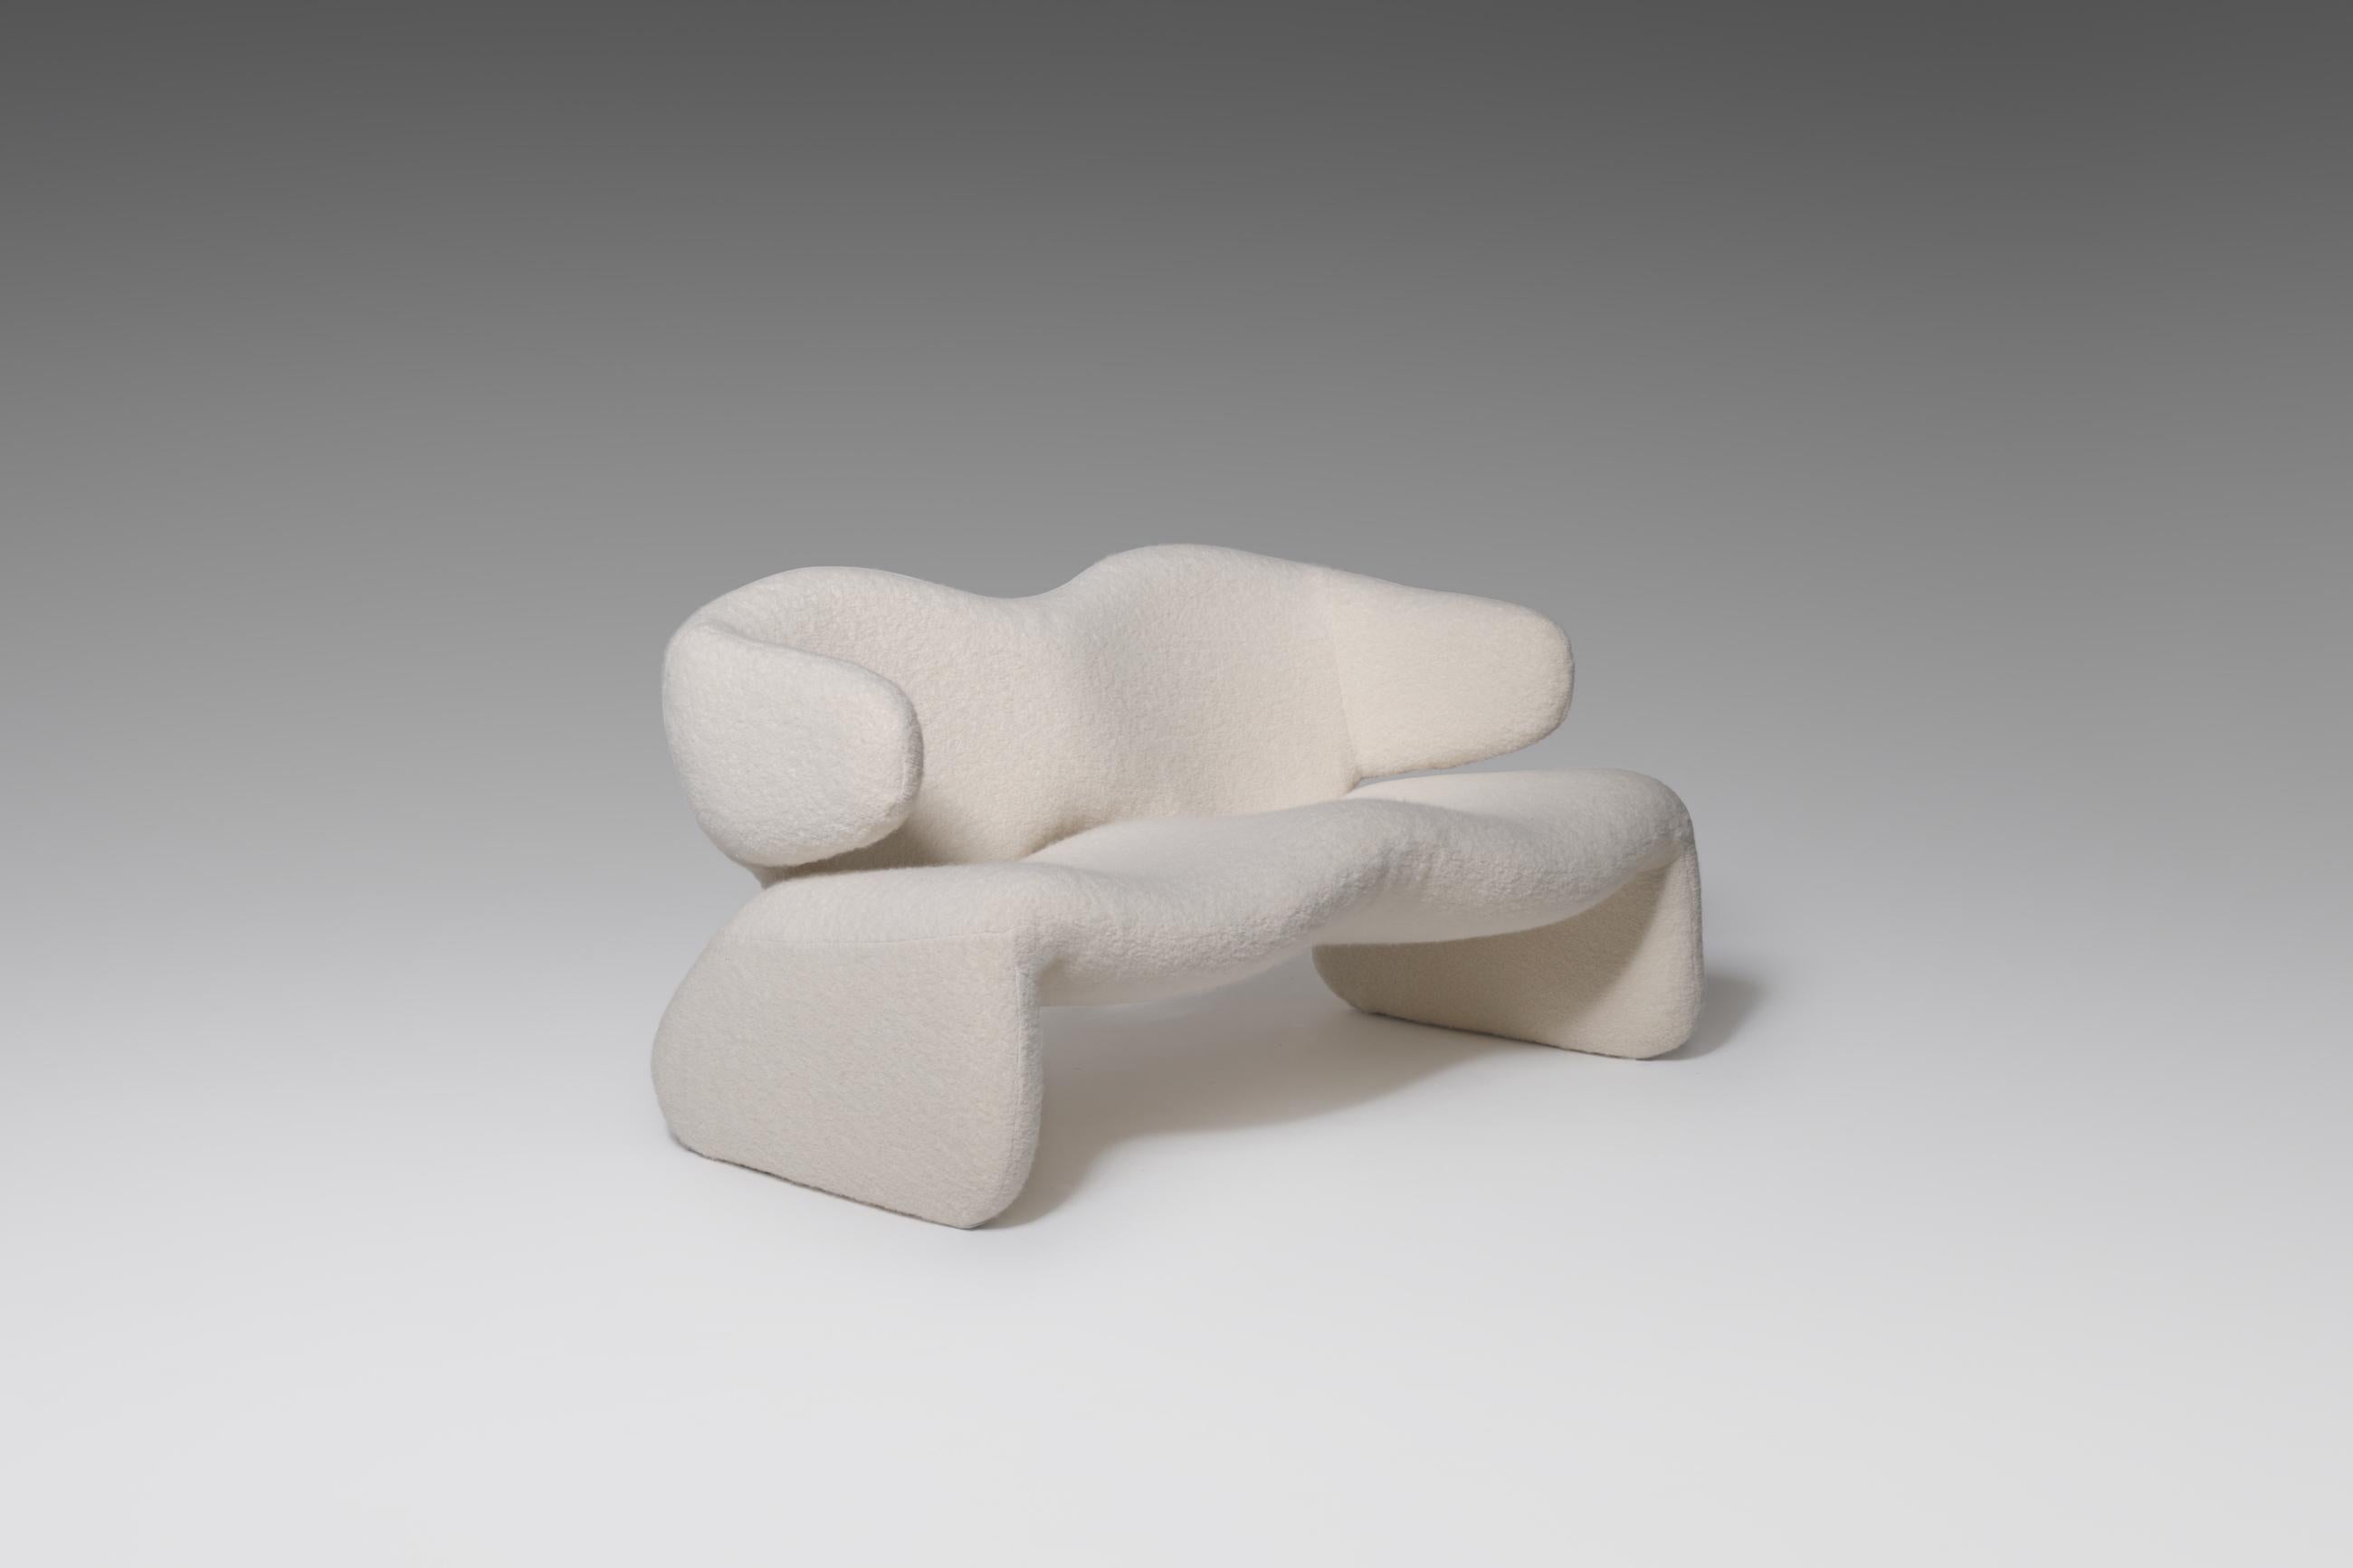 'Djinn' sofa by Olivier Mourgue for Airborne International, France 1964-1965. Made of a tubular steel frame with rubber singles, foam and woolen fabric. Mourgue takes a very important place in the world of modern French design. The sofa well known